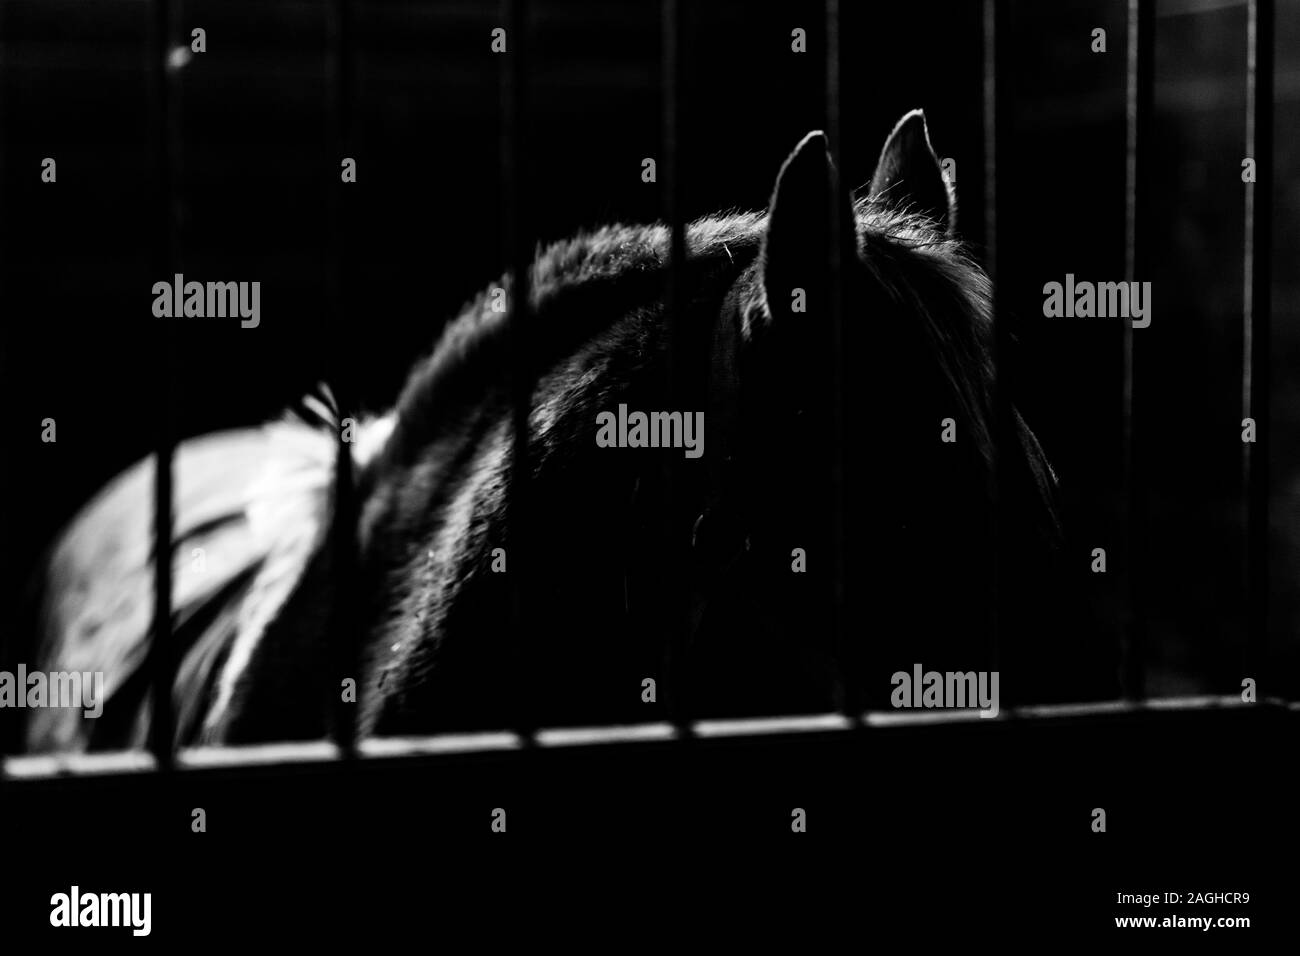 Black and white landscape image shot with a low-key exposure of cross-tie ring inside a horse barn in winter. Stock Photo